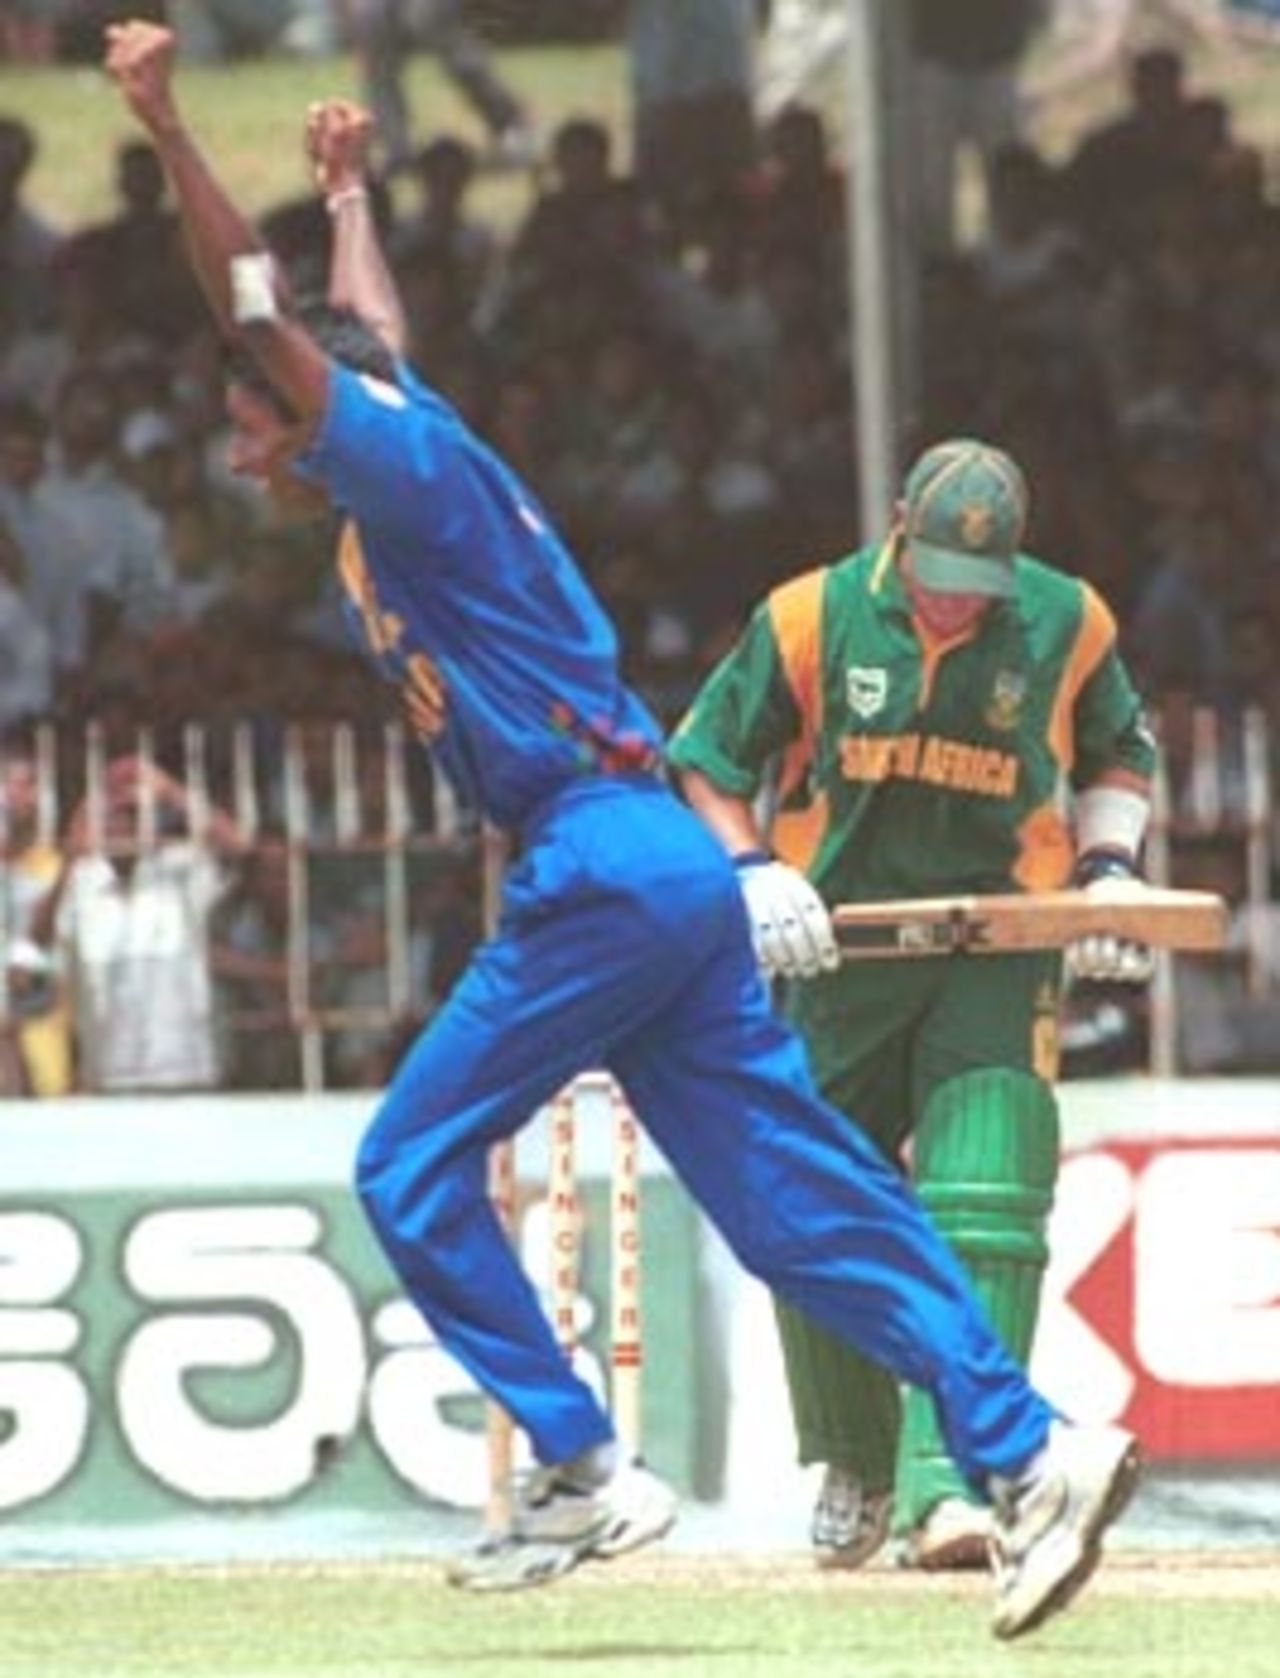 Boucher walks back dejected after being caught by Jayawardene. Singer Triangular Series 2000/01, Sri Lanka v South Africa, Sinhalese Sports Club Ground, Colombo 11 July 2000.